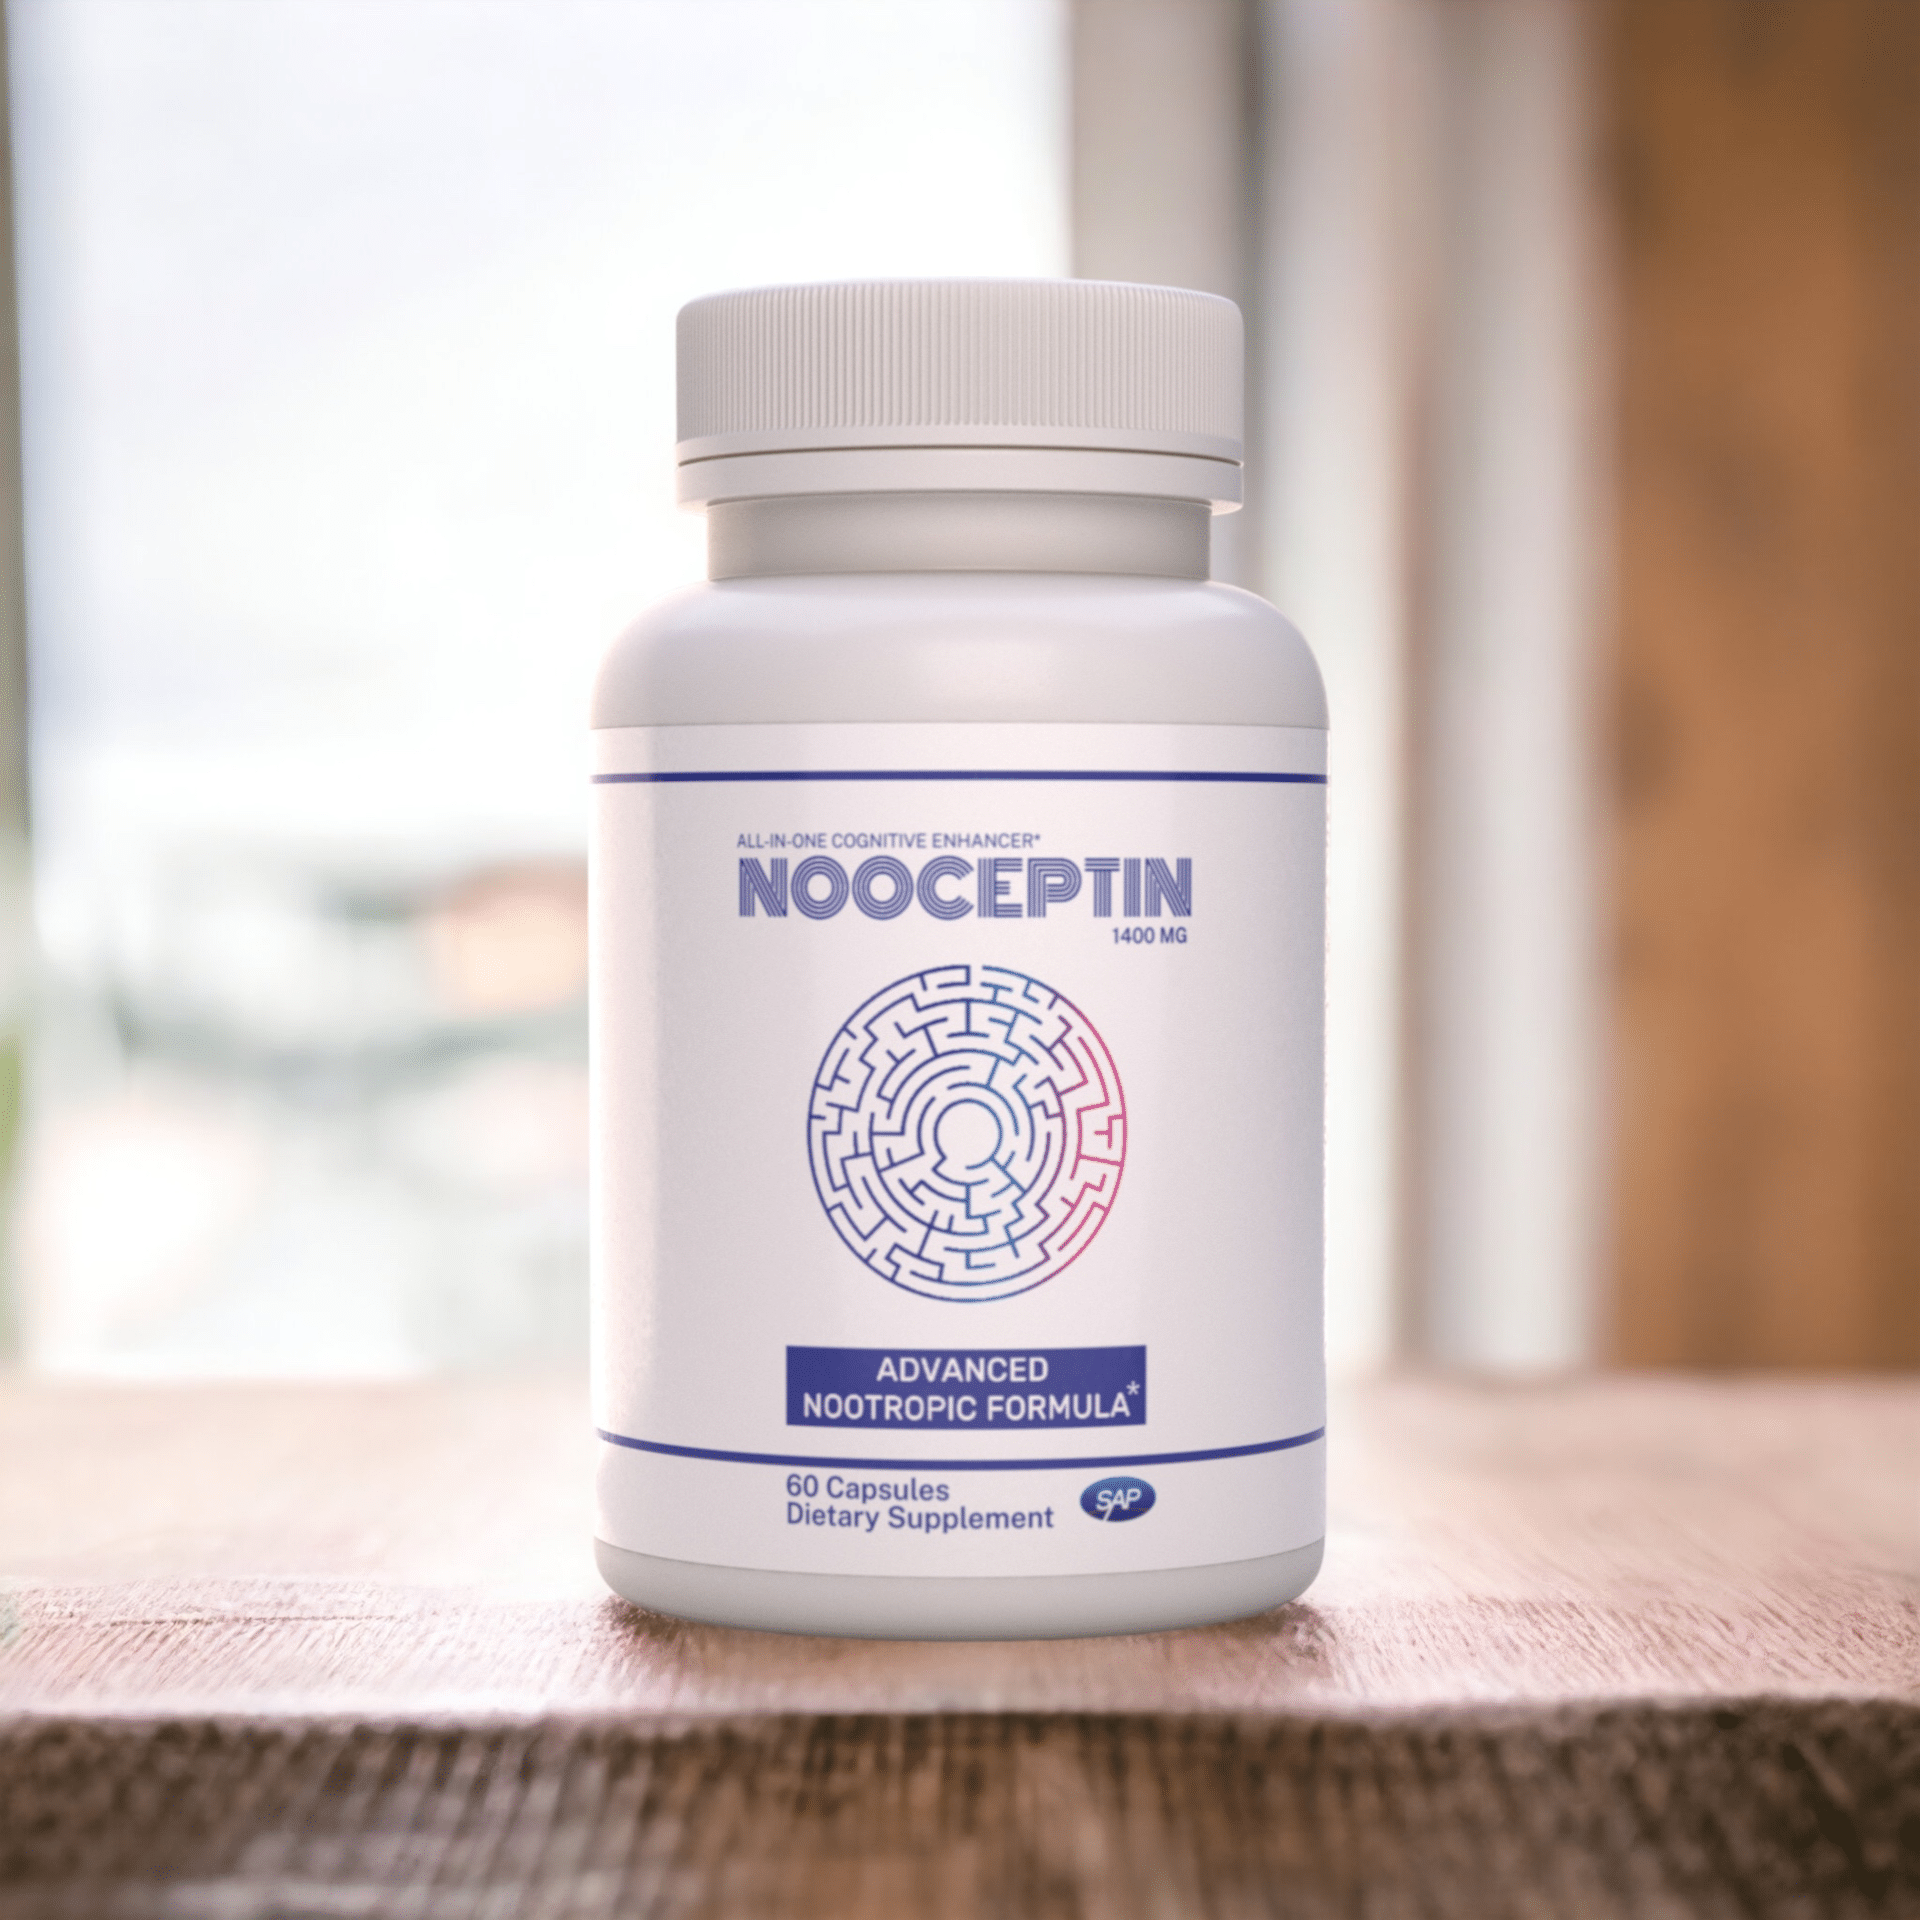 Nooceptin Best Nootropic For Learning and Studying